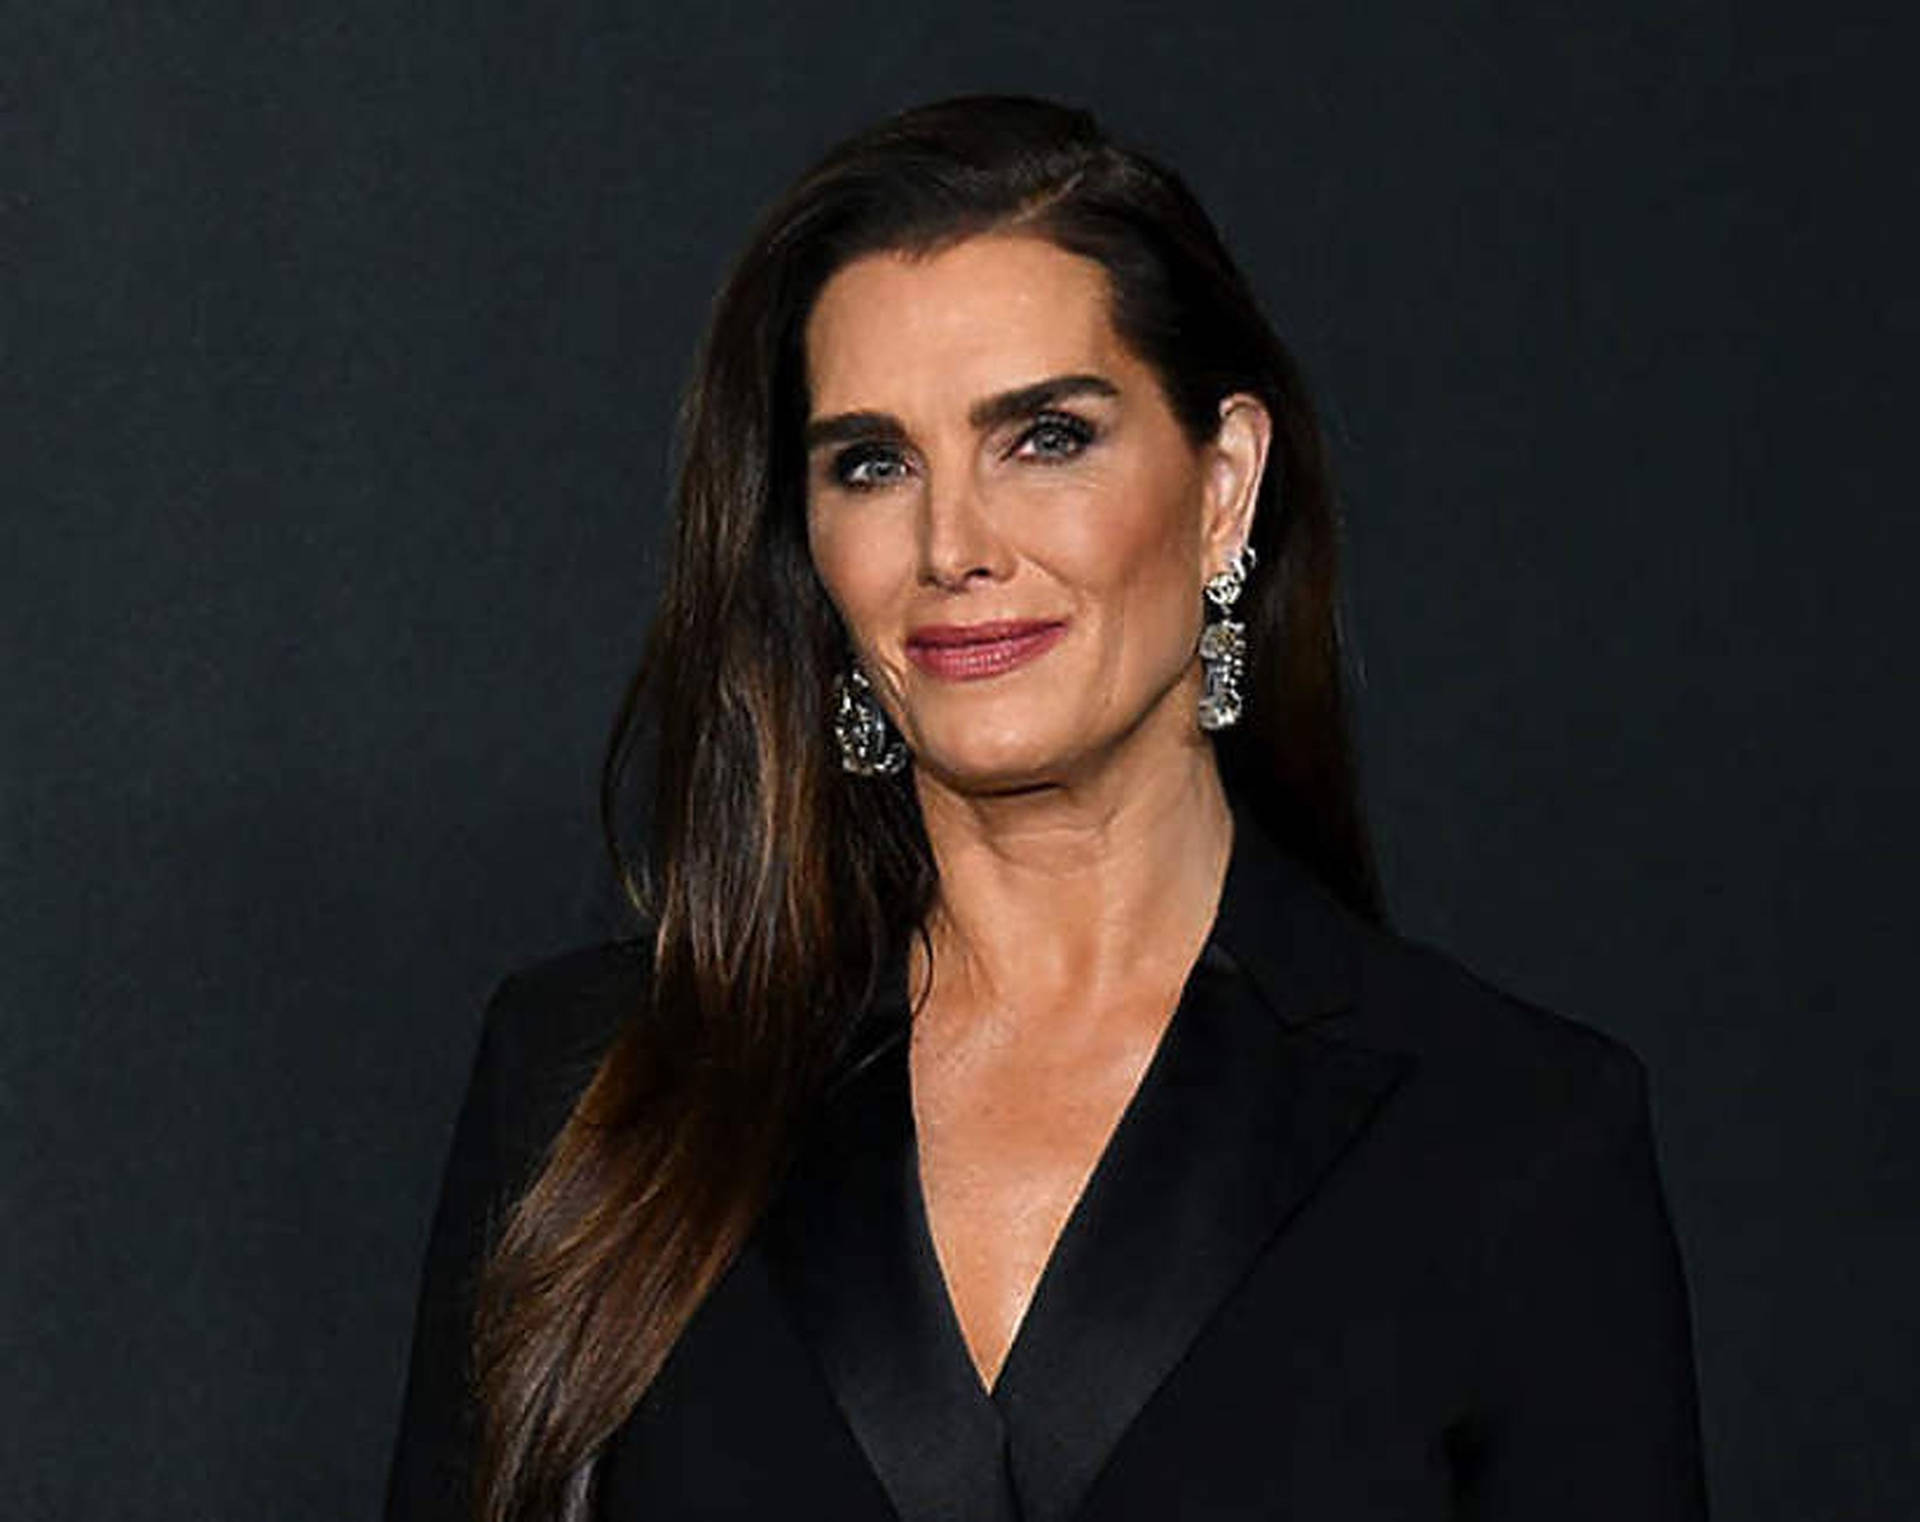 Brooke Shields In Black Outfit Background